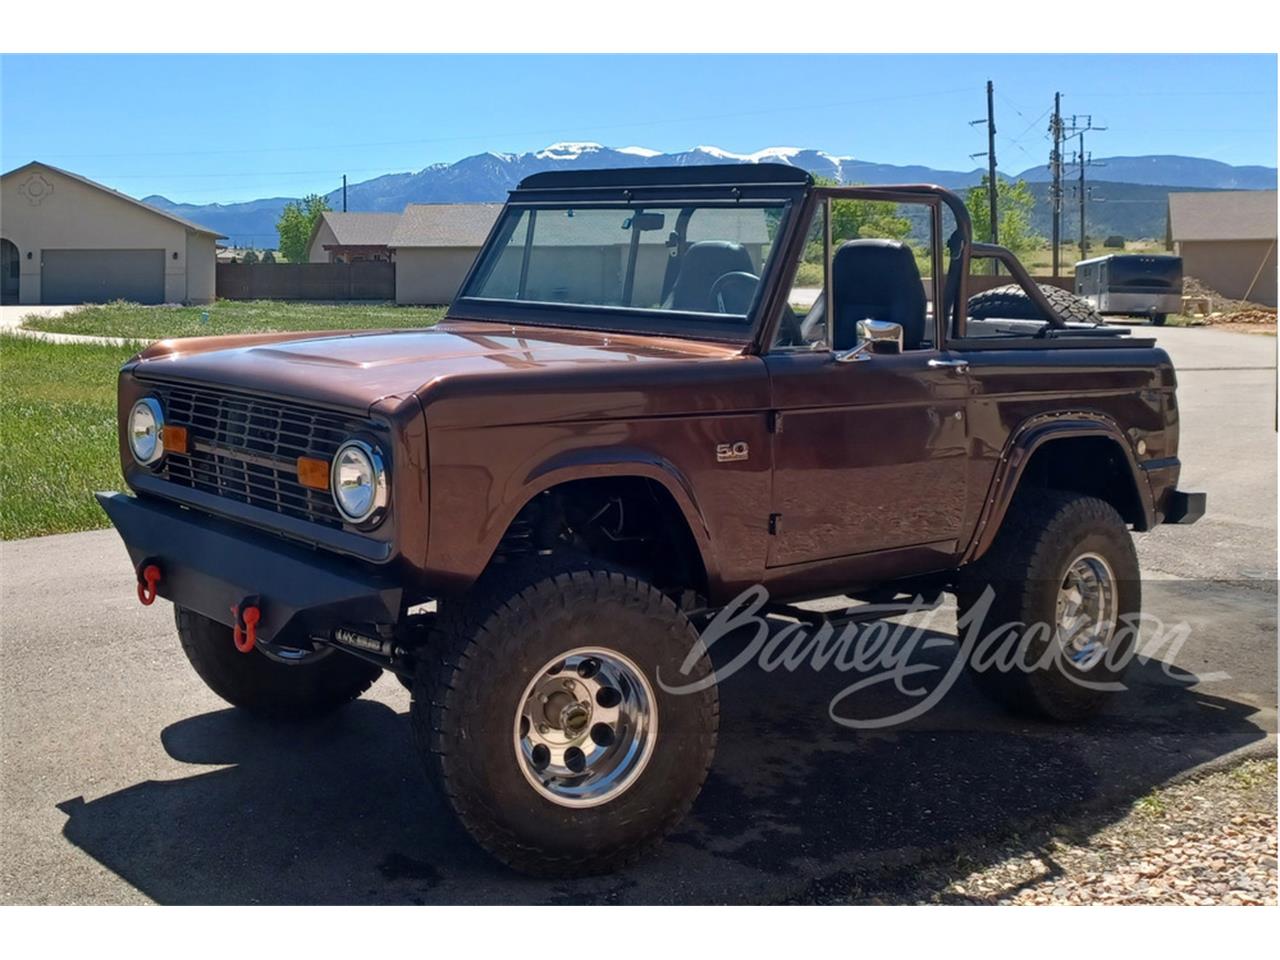 For Sale at Auction: 1969 Ford Bronco in Scottsdale, Arizona for sale in Scottsdale, AZ